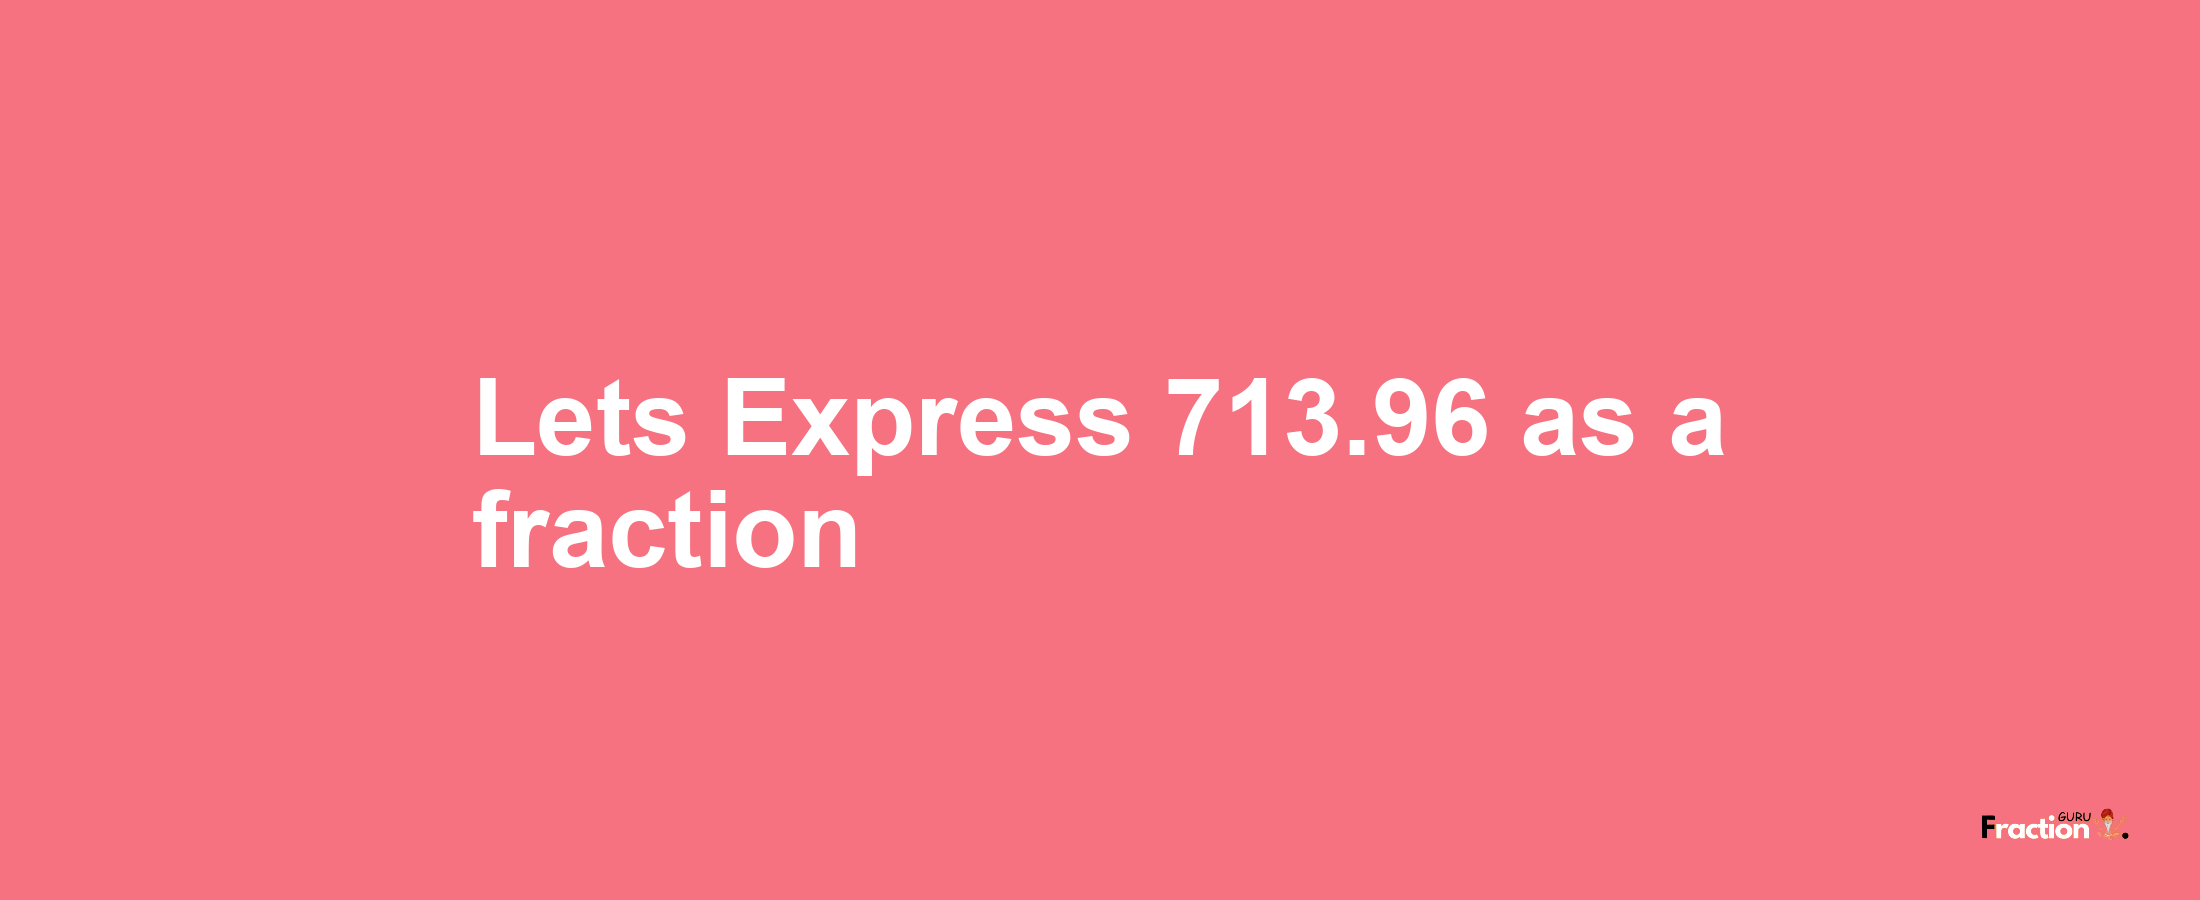 Lets Express 713.96 as afraction